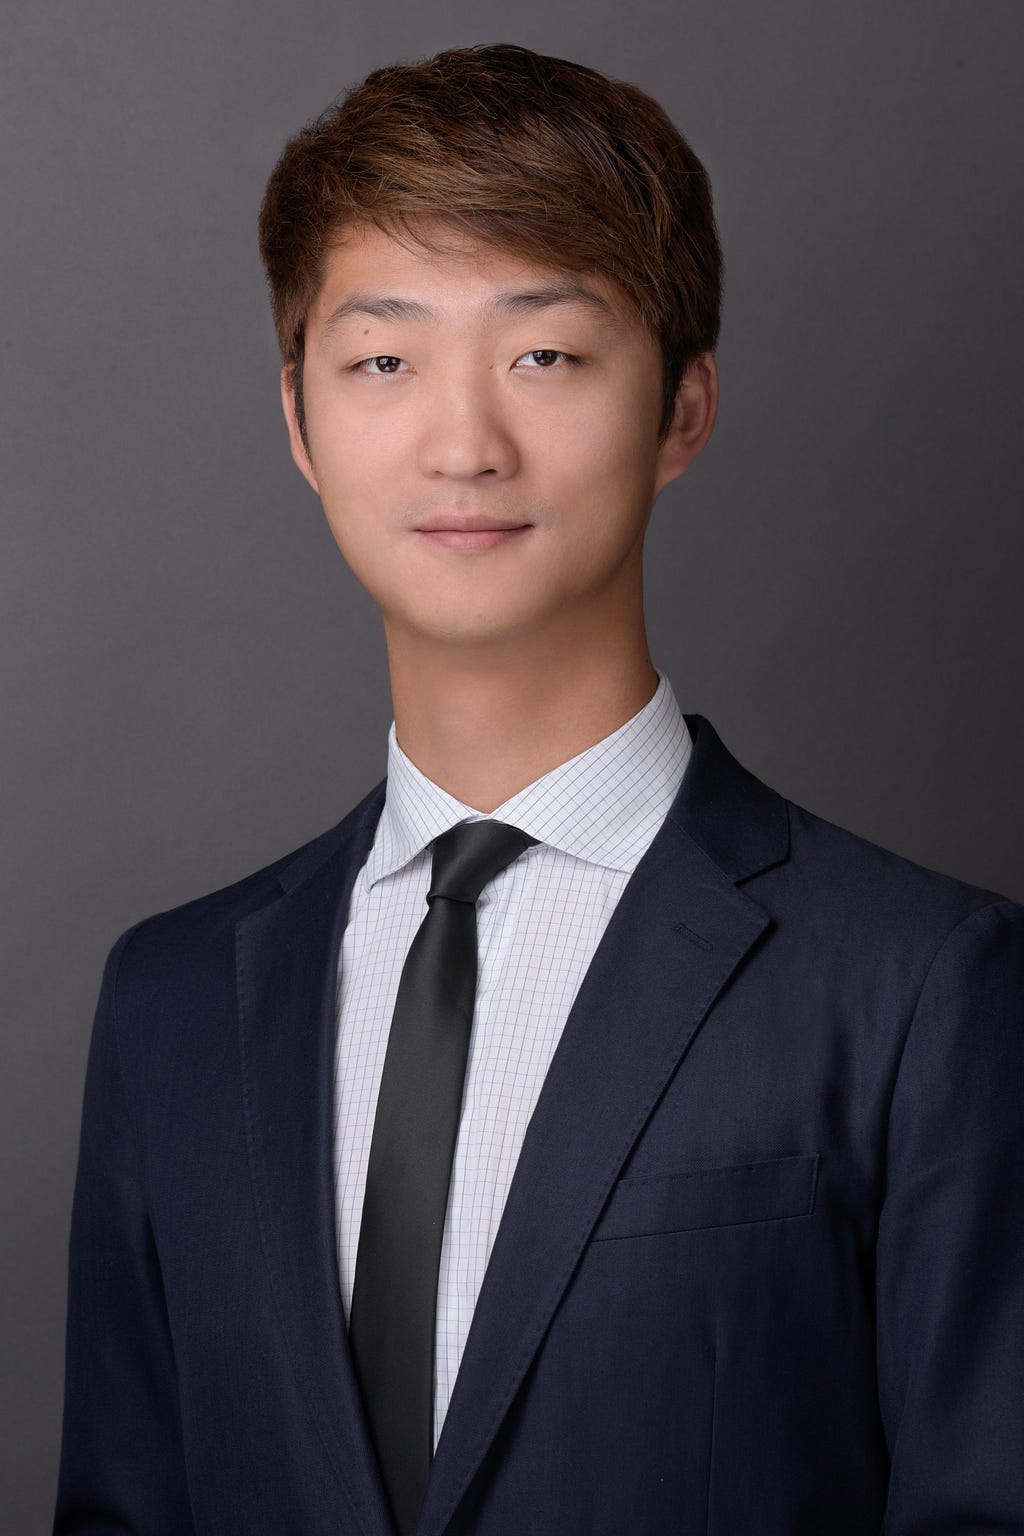 Welcoming Richard Ma, CEO of Quantstamp, as a Venture Partner at Bloccelerate VC